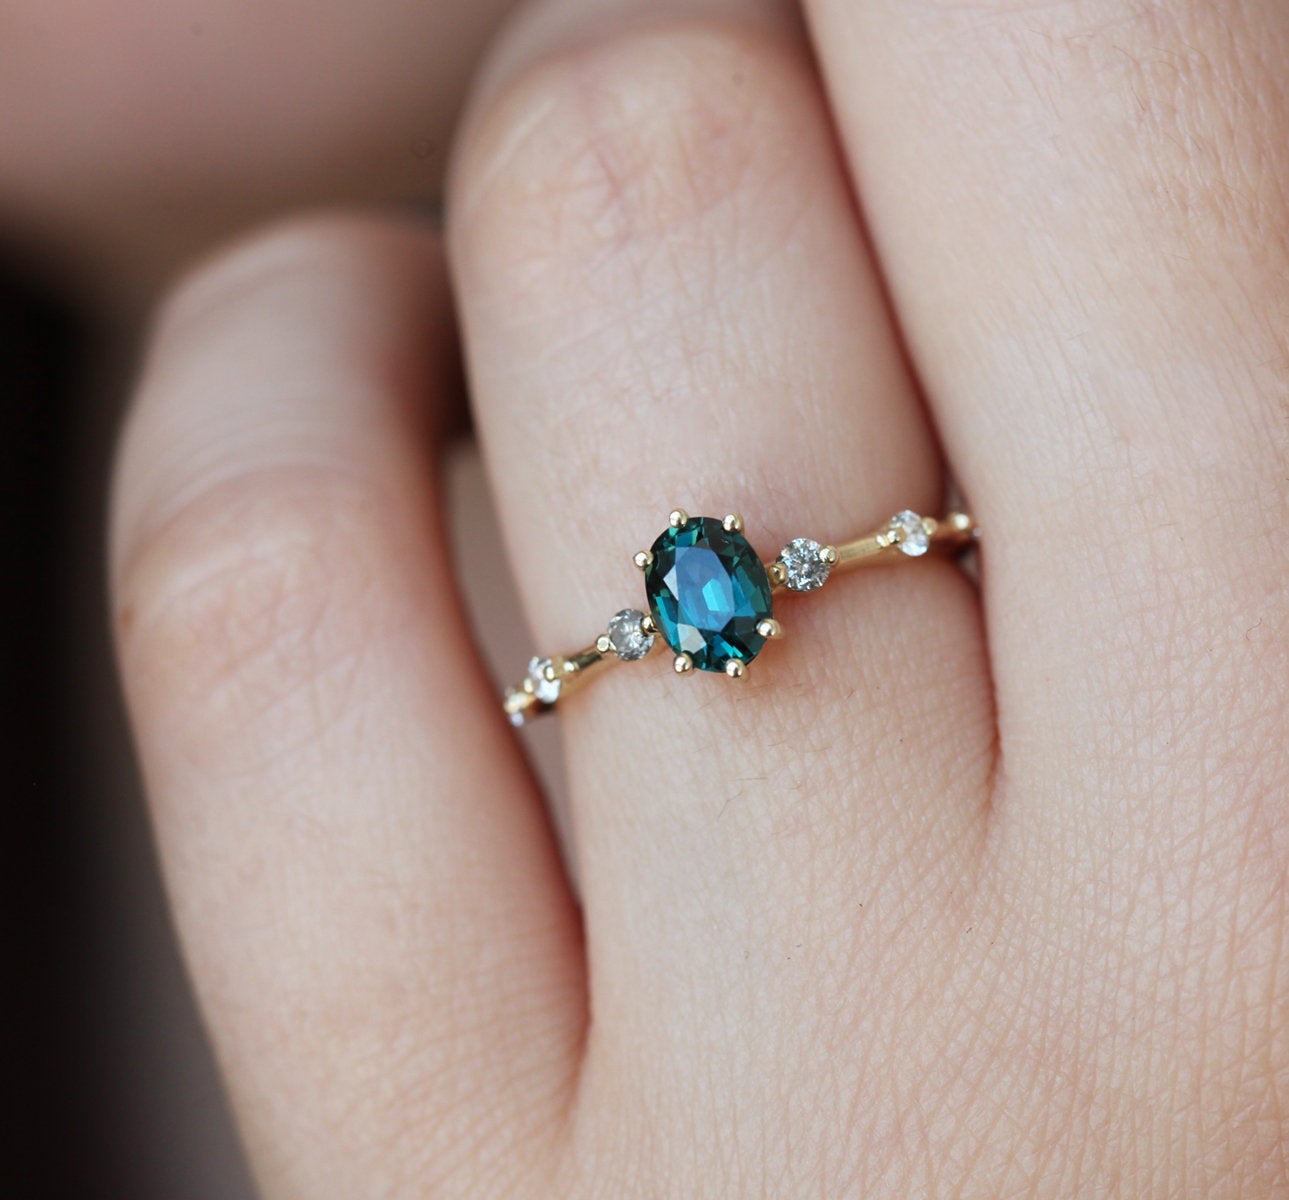 Oval-shaped teal sapphire ring with salt and pepper diamond gemstones